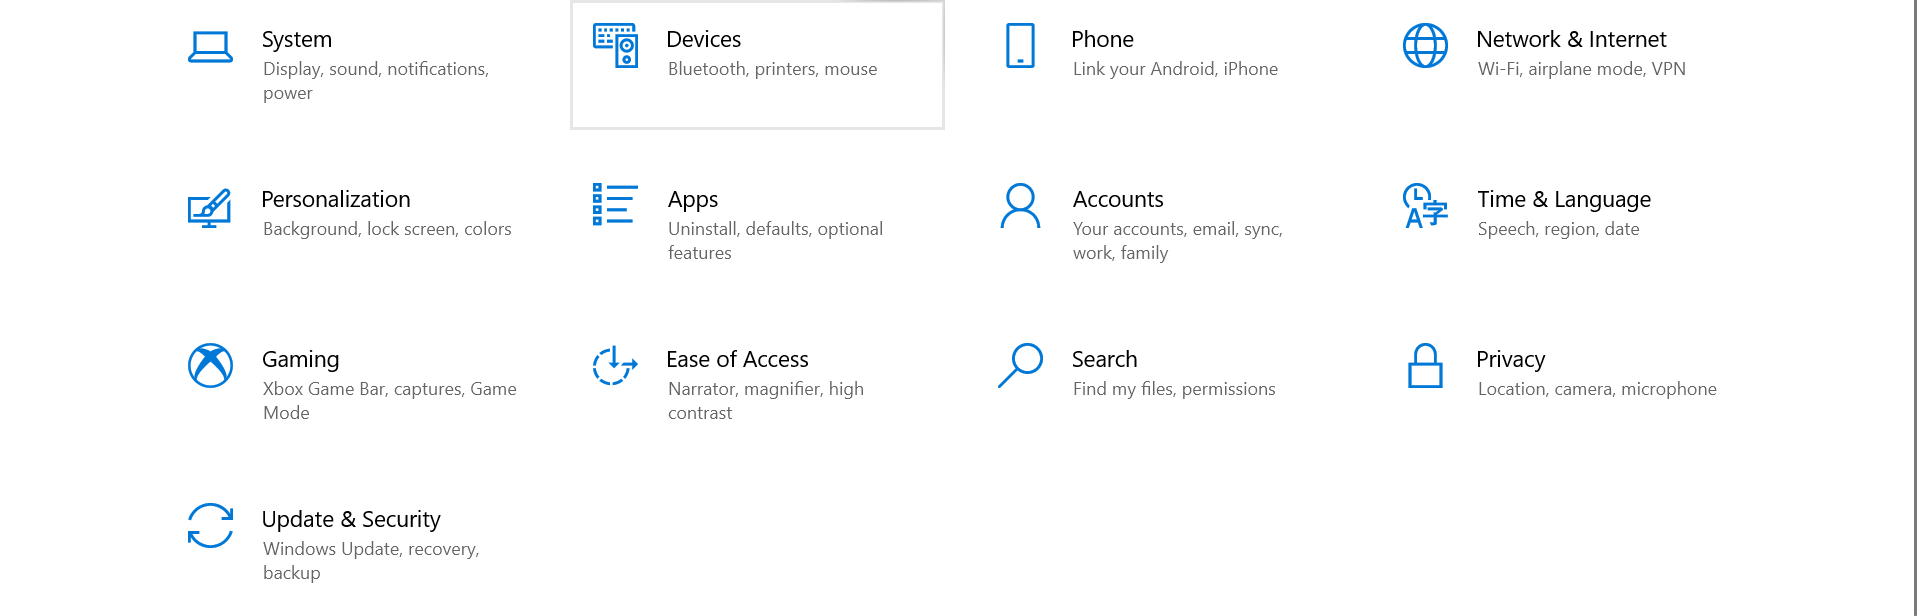 Devices option in Settings